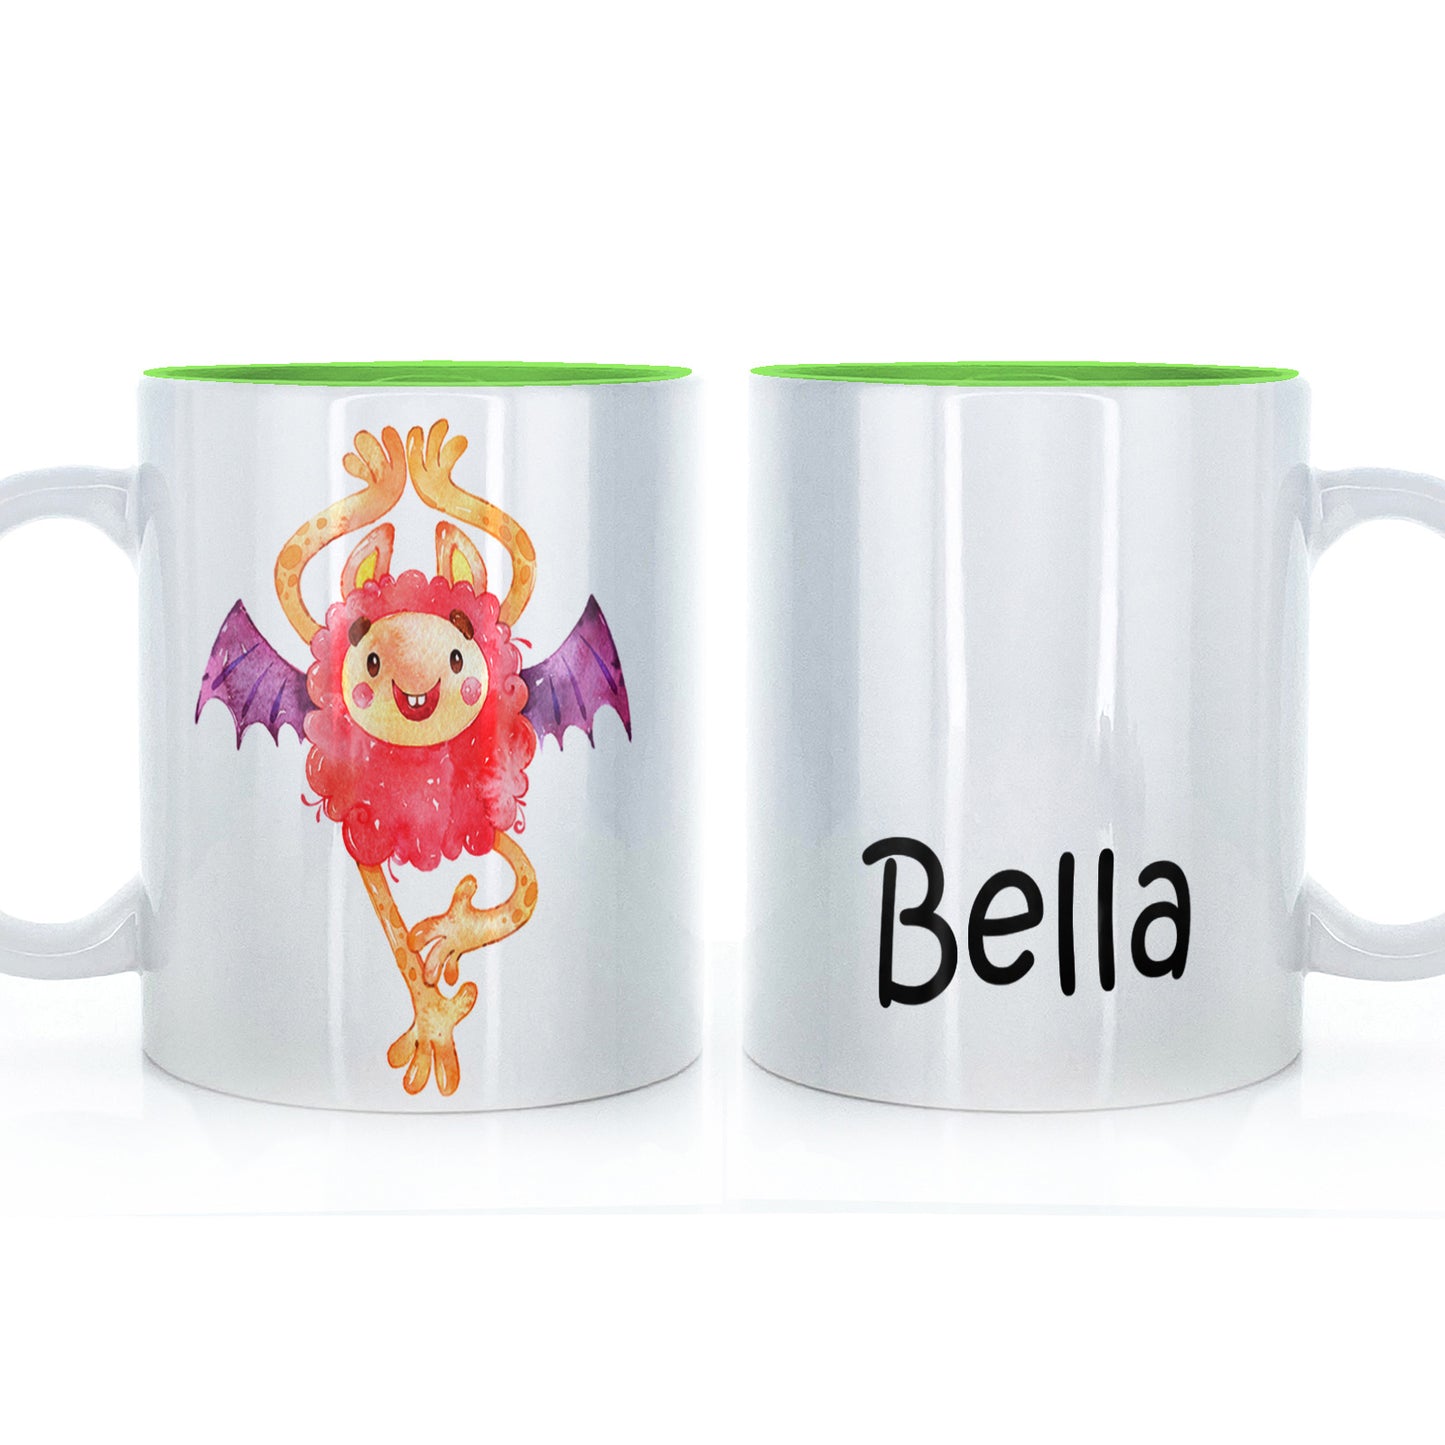 Personalised Mug with Childish Text and Woolly Red Bat Monster